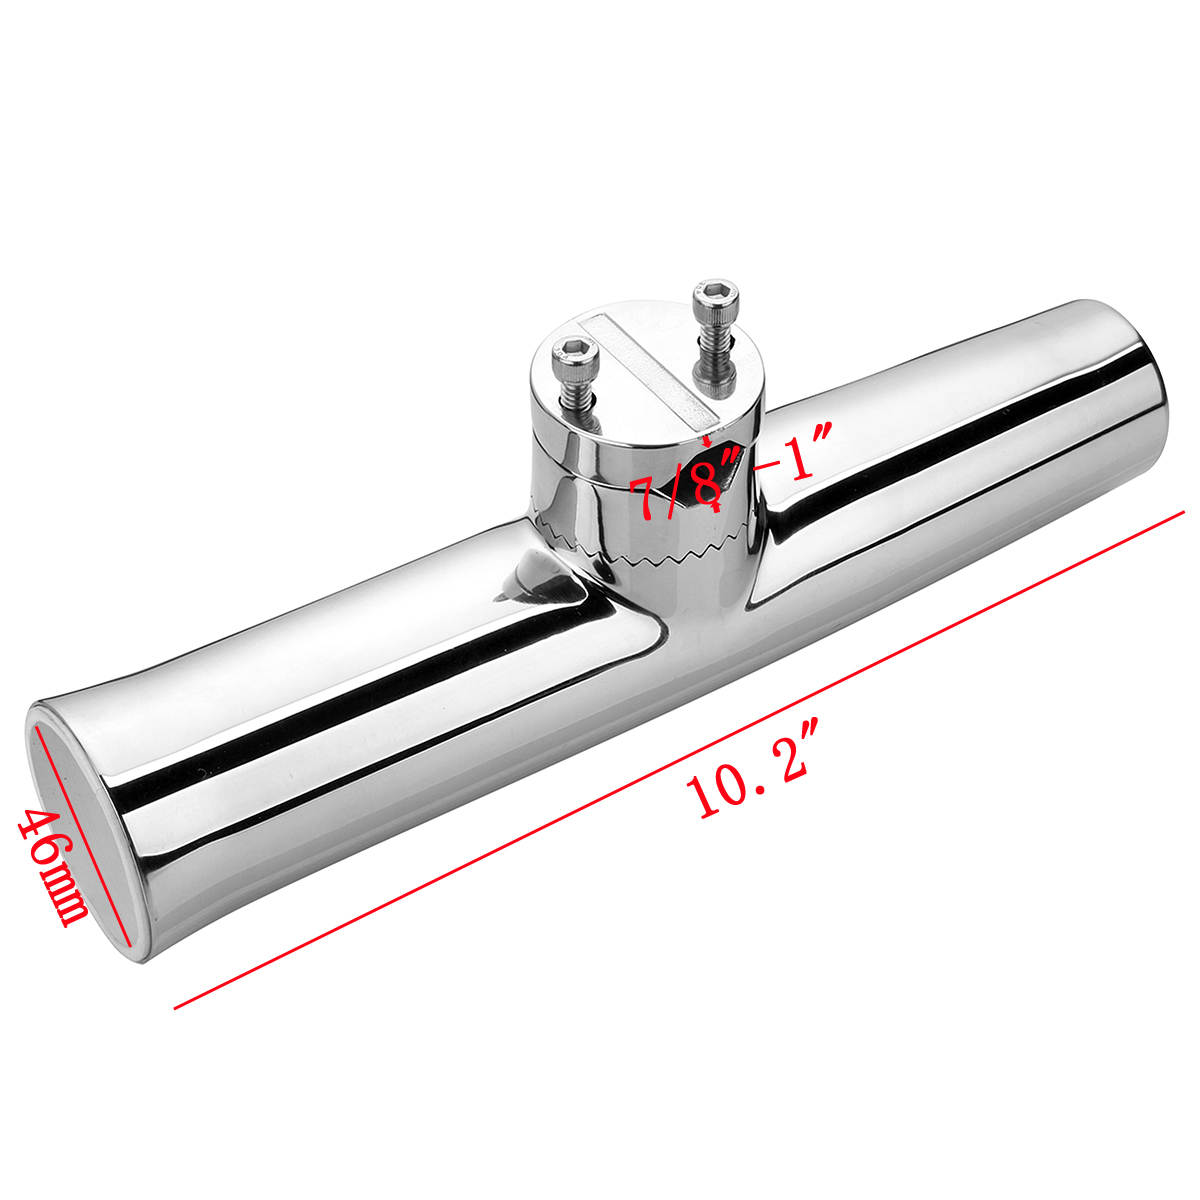 316-Stainless-Steel-78-1-Tube-Fishing-Rod-Holder-Boat-Tackle-Clamp-On-Rail-Mount-1283705-5